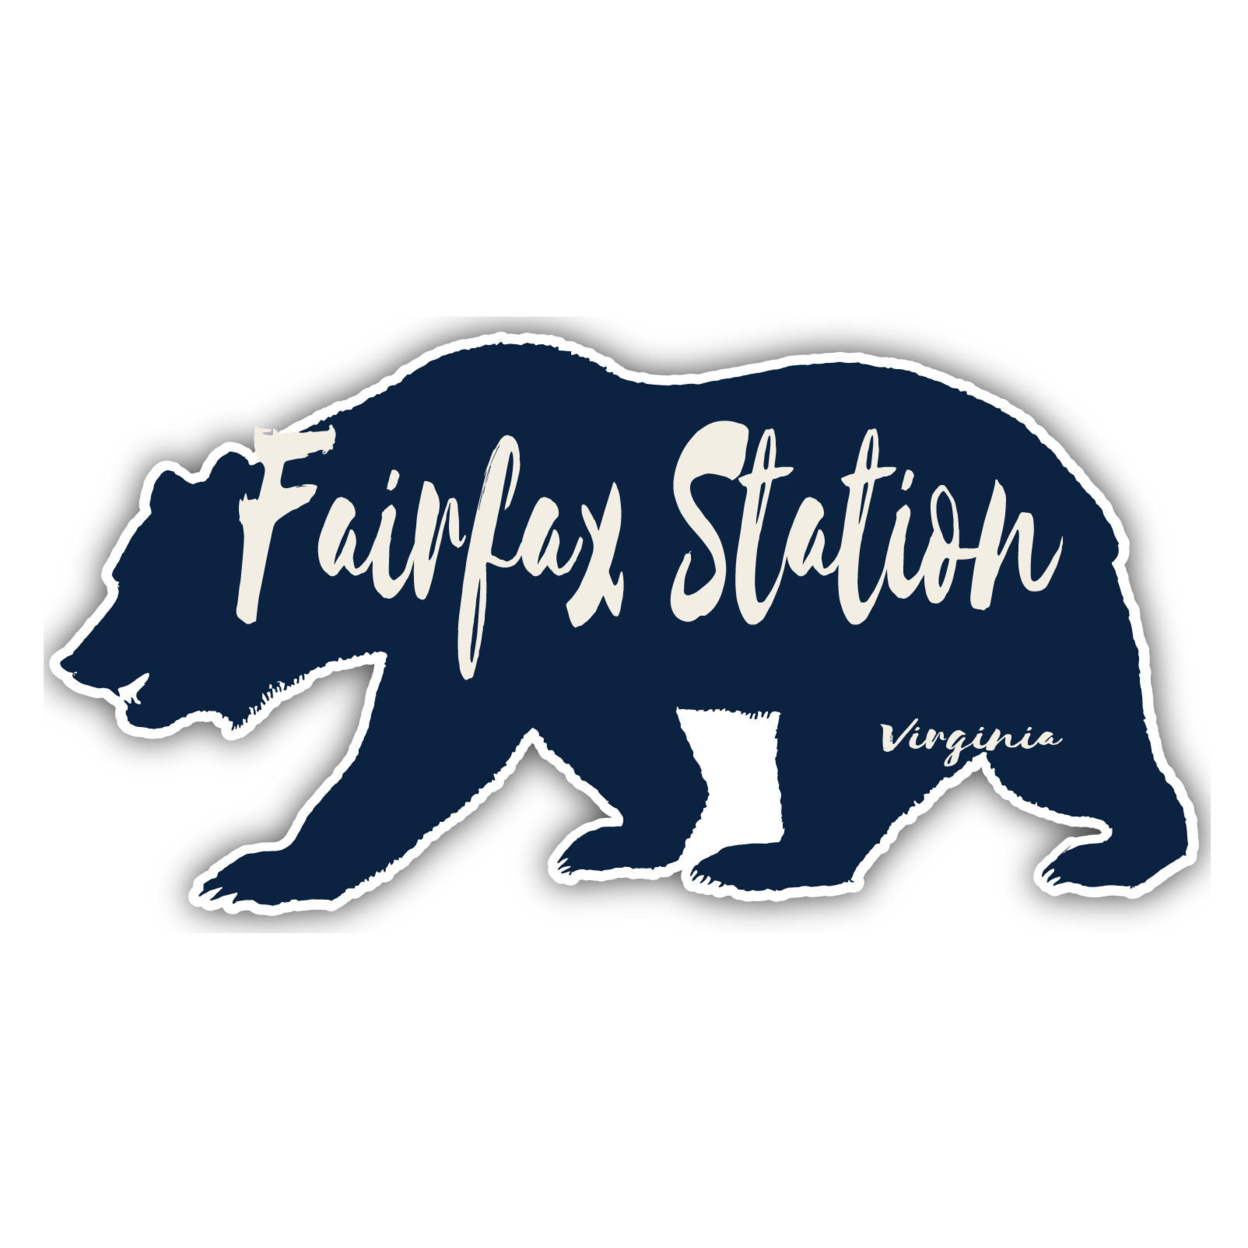 Fairfax Station Virginia Souvenir Decorative Stickers (Choose Theme And Size) - Single Unit, 4-Inch, Great Outdoors